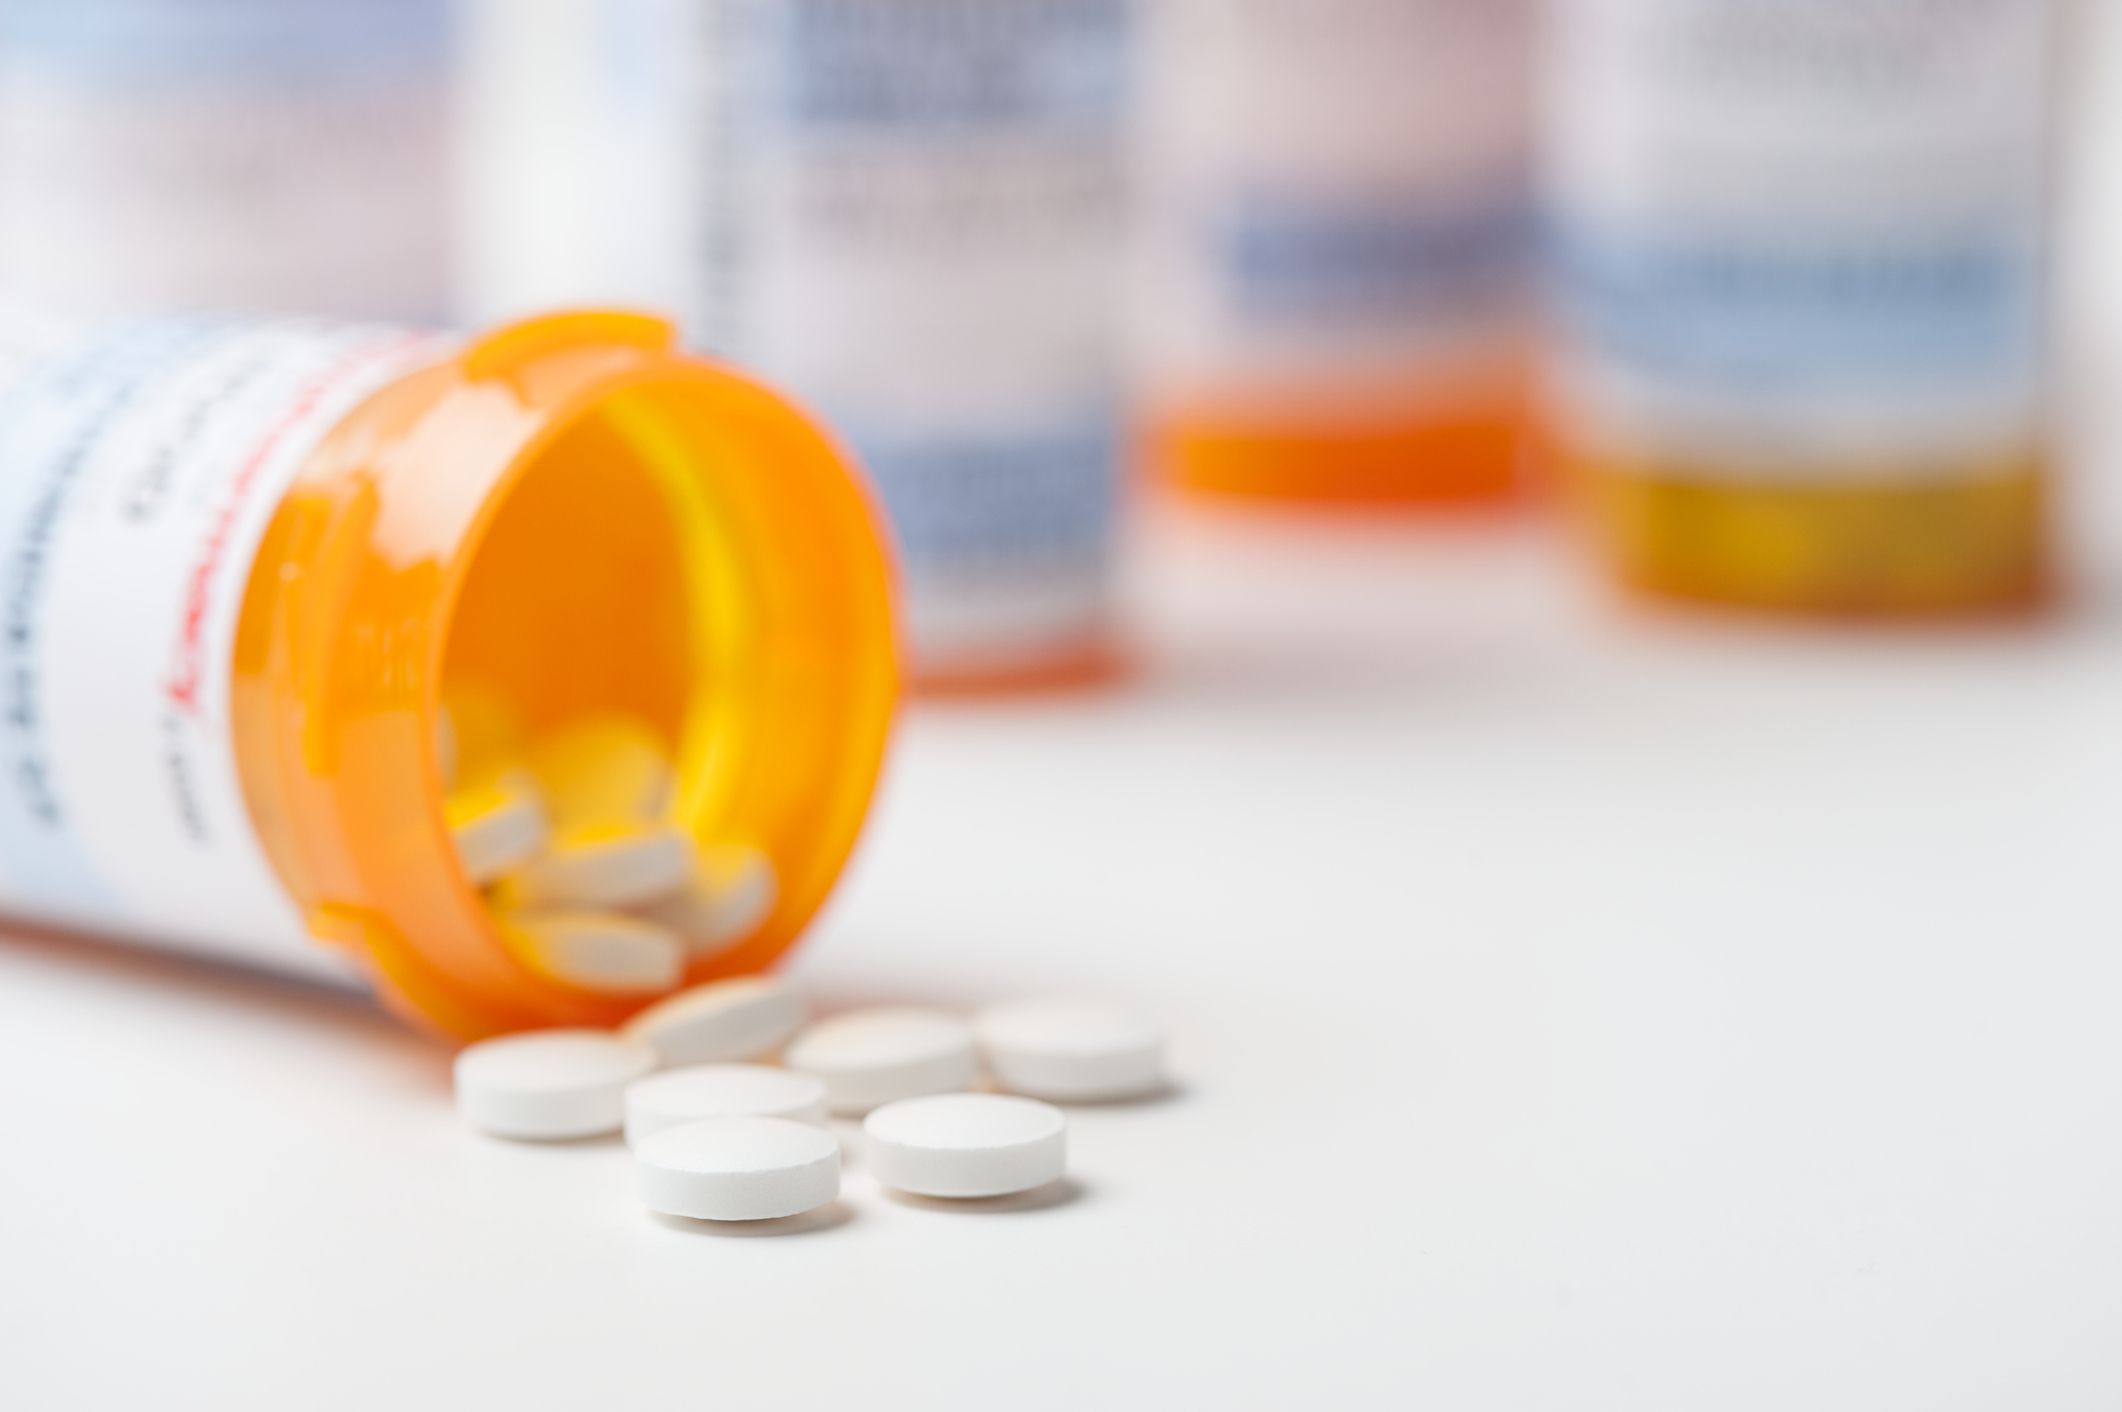 The whole point of going to the trouble of taking medications you need to function is for them to work. Expired medications may not only be less effective, but they can also become a public safety issue if improperly disposed of.<p>So, <a href="https://blog.cheapism.com/how-to-spring-clean-medicine-cabinet/">safely dispose of any expired medications</a> that you find in your home by removing your prescription number along with any other personal information and find a <a href="https://www.dea.gov/takebackday">drug take-back program</a> in your area or find a <a href="https://safe.pharmacy/drug-disposal/">drug disposal site nearby</a> (often located at your local pharmacy).</p>